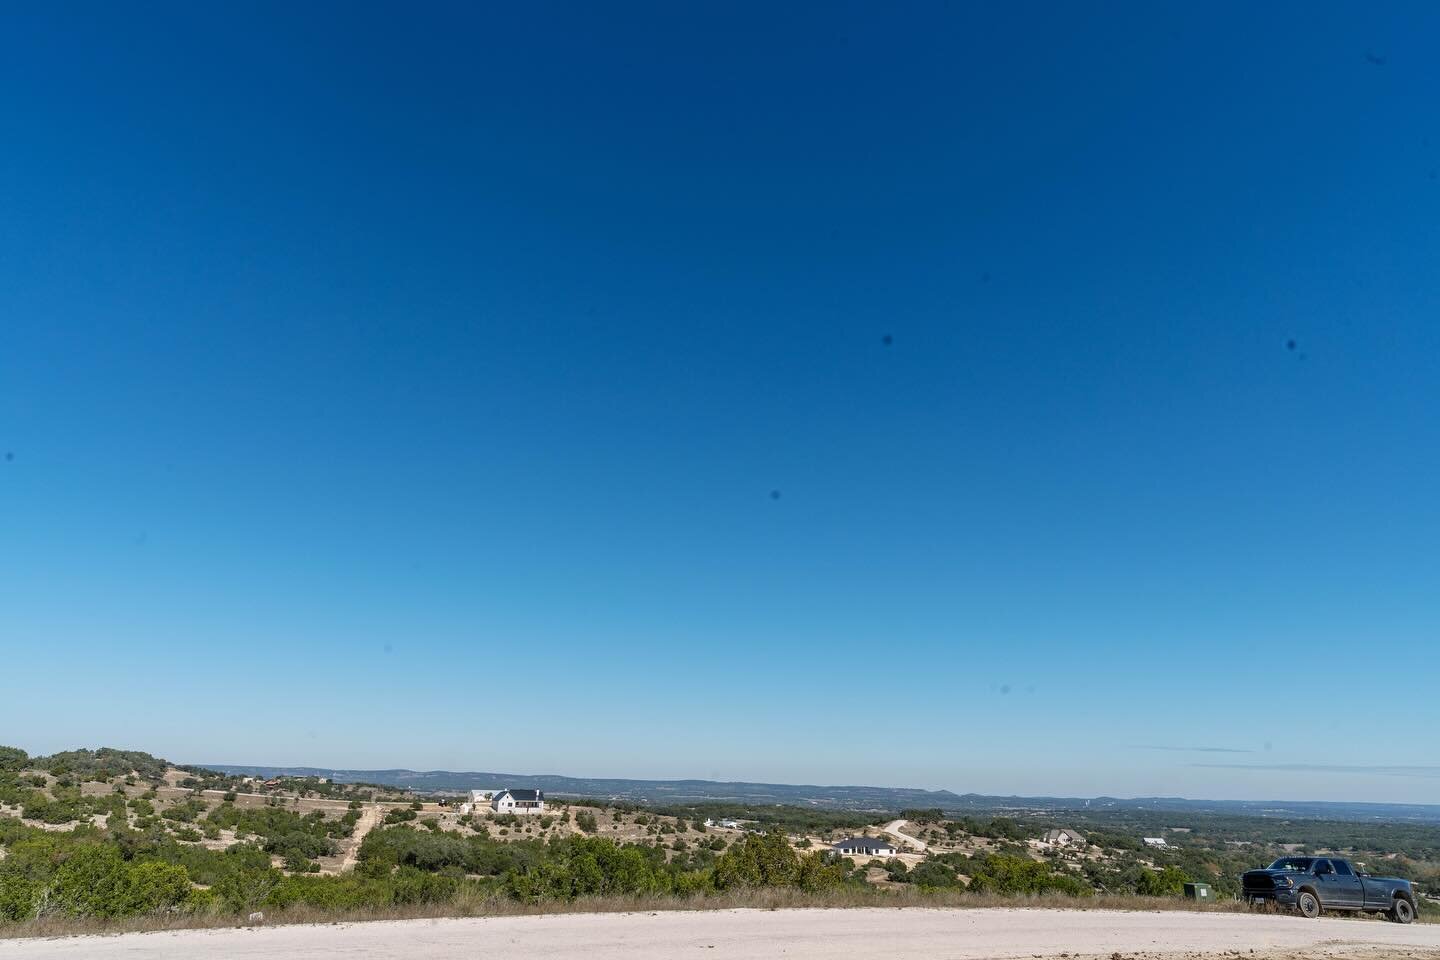 Last week&rsquo;s rains made us dream about blue skies!

#landscaping #NewBraunfelslandscaping #Bulverdelandscaping #SpringBranchlandscaping #TXlandscaping #Austinlandscaping #outdoorbuilds #txhillcountry #hillcountrycustomhomes #newbraunfelscustomho